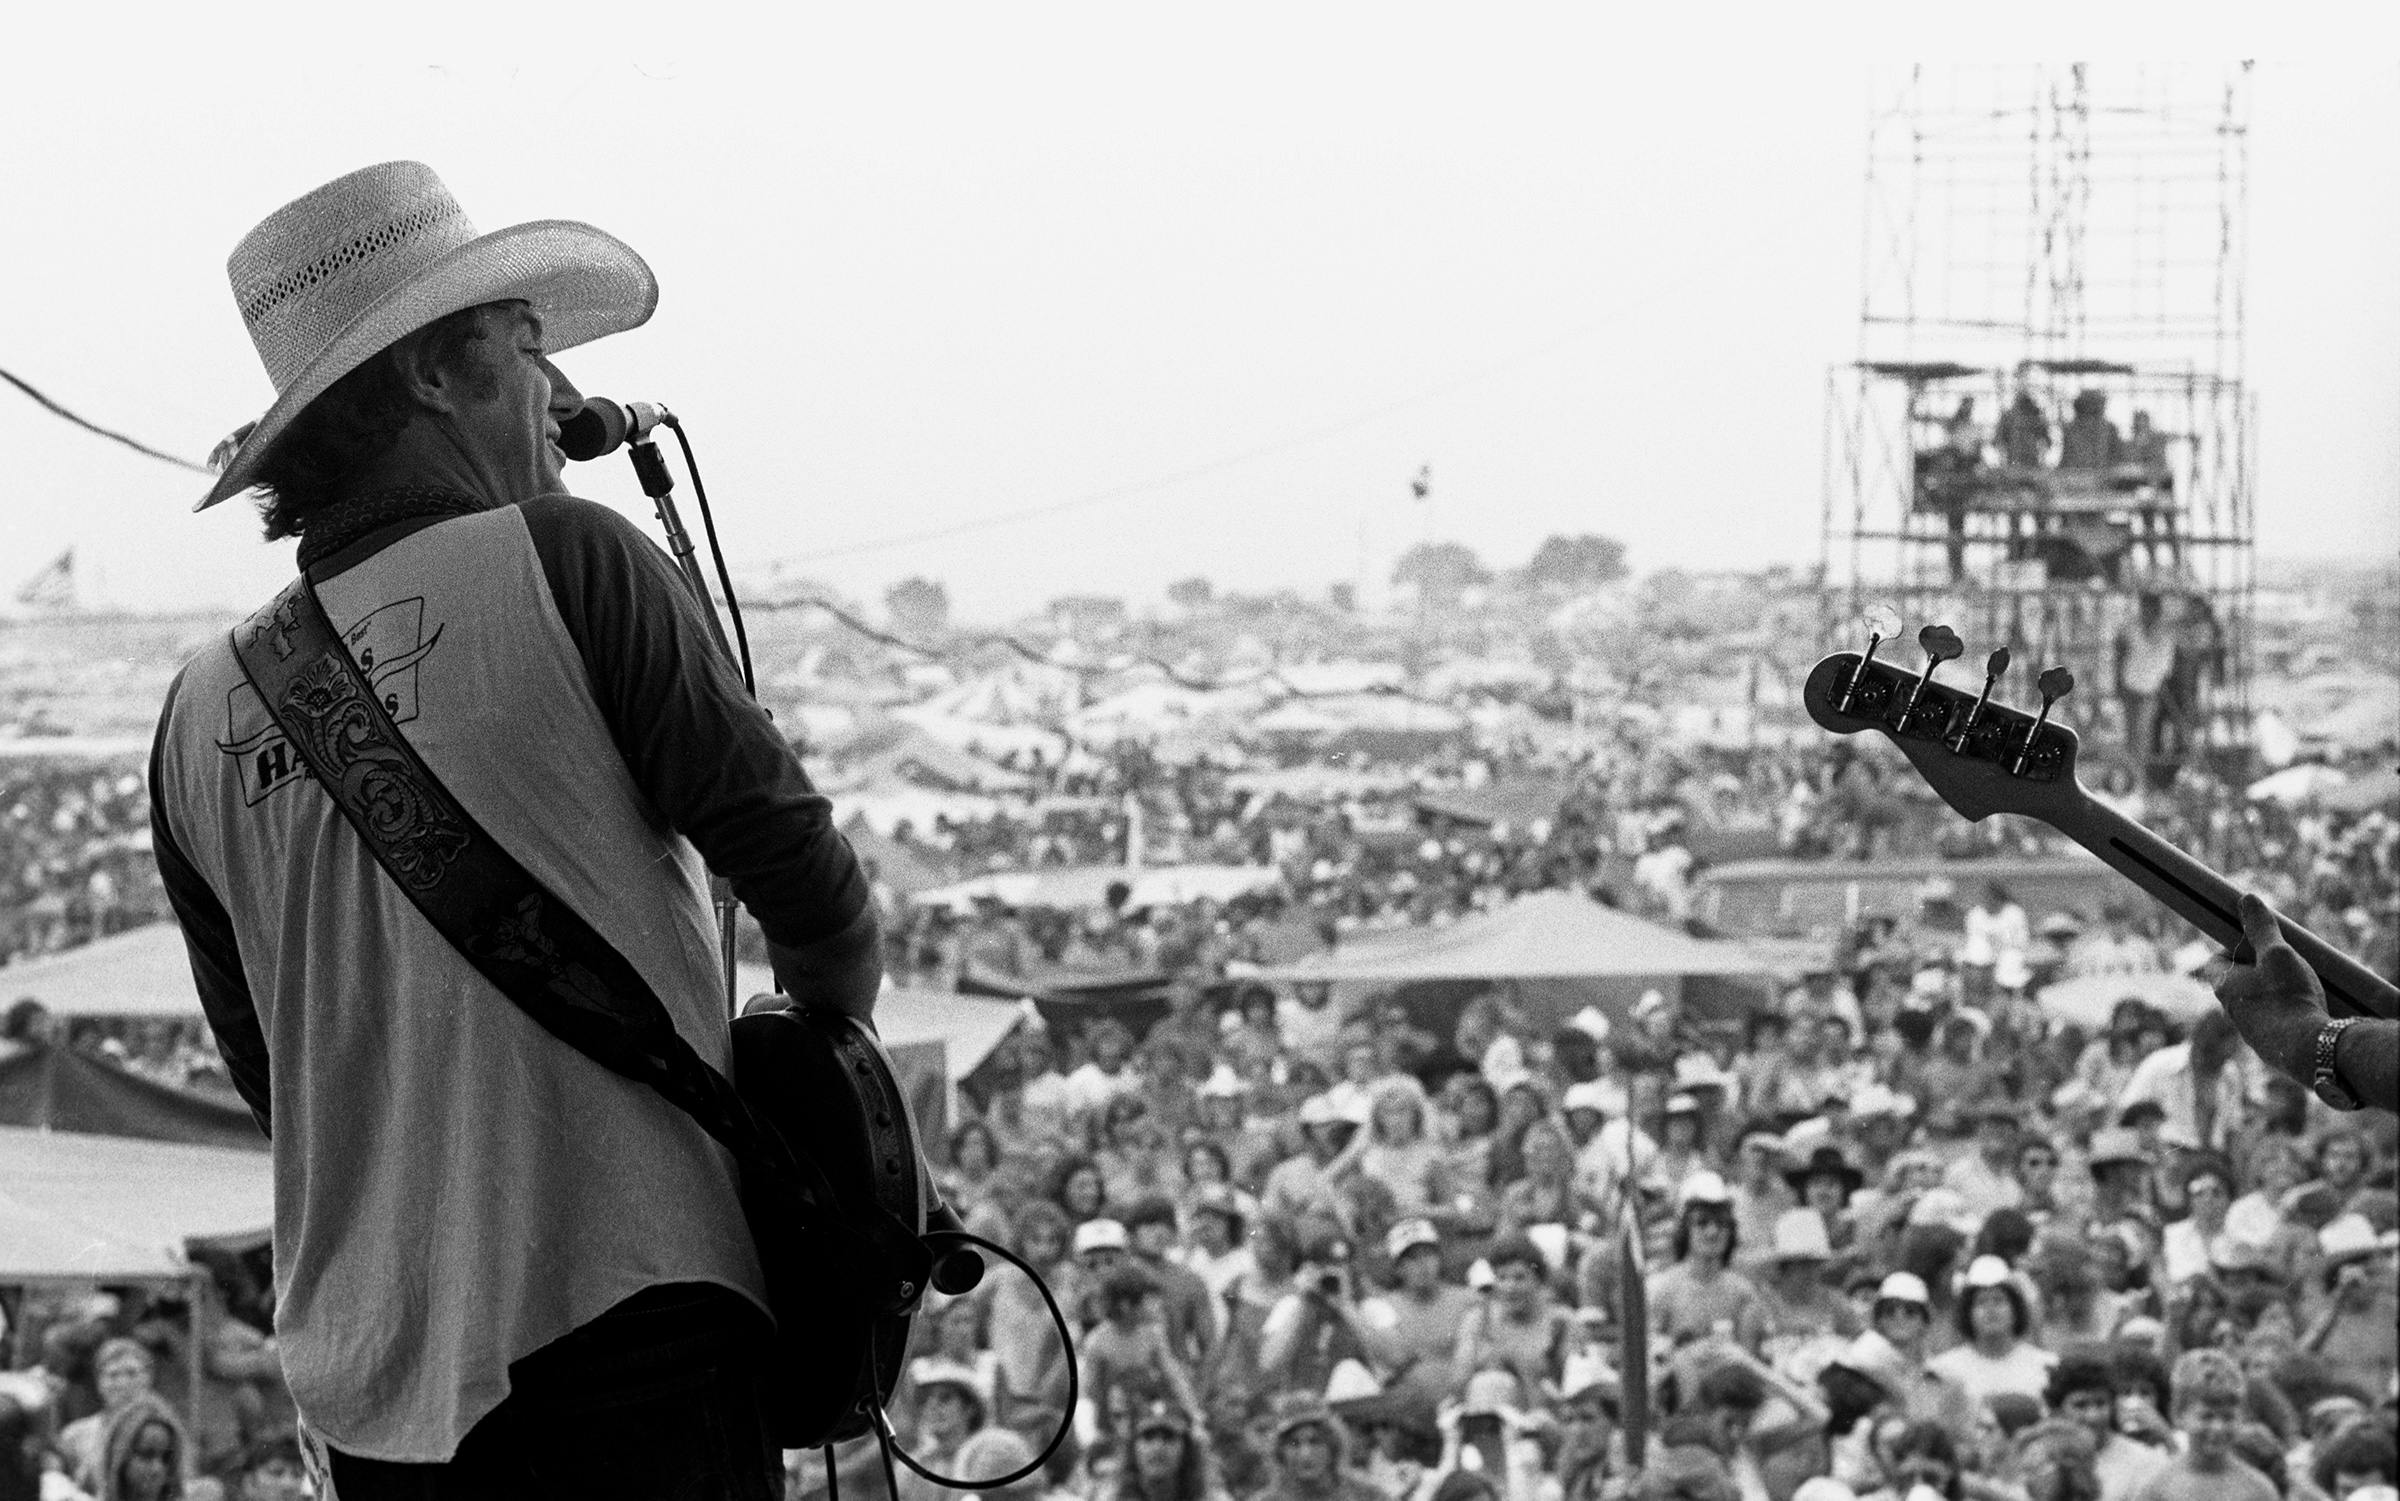 Jerry Jeff Walker performing in front of a large crowd at Willie's 4th of July Picnic. 